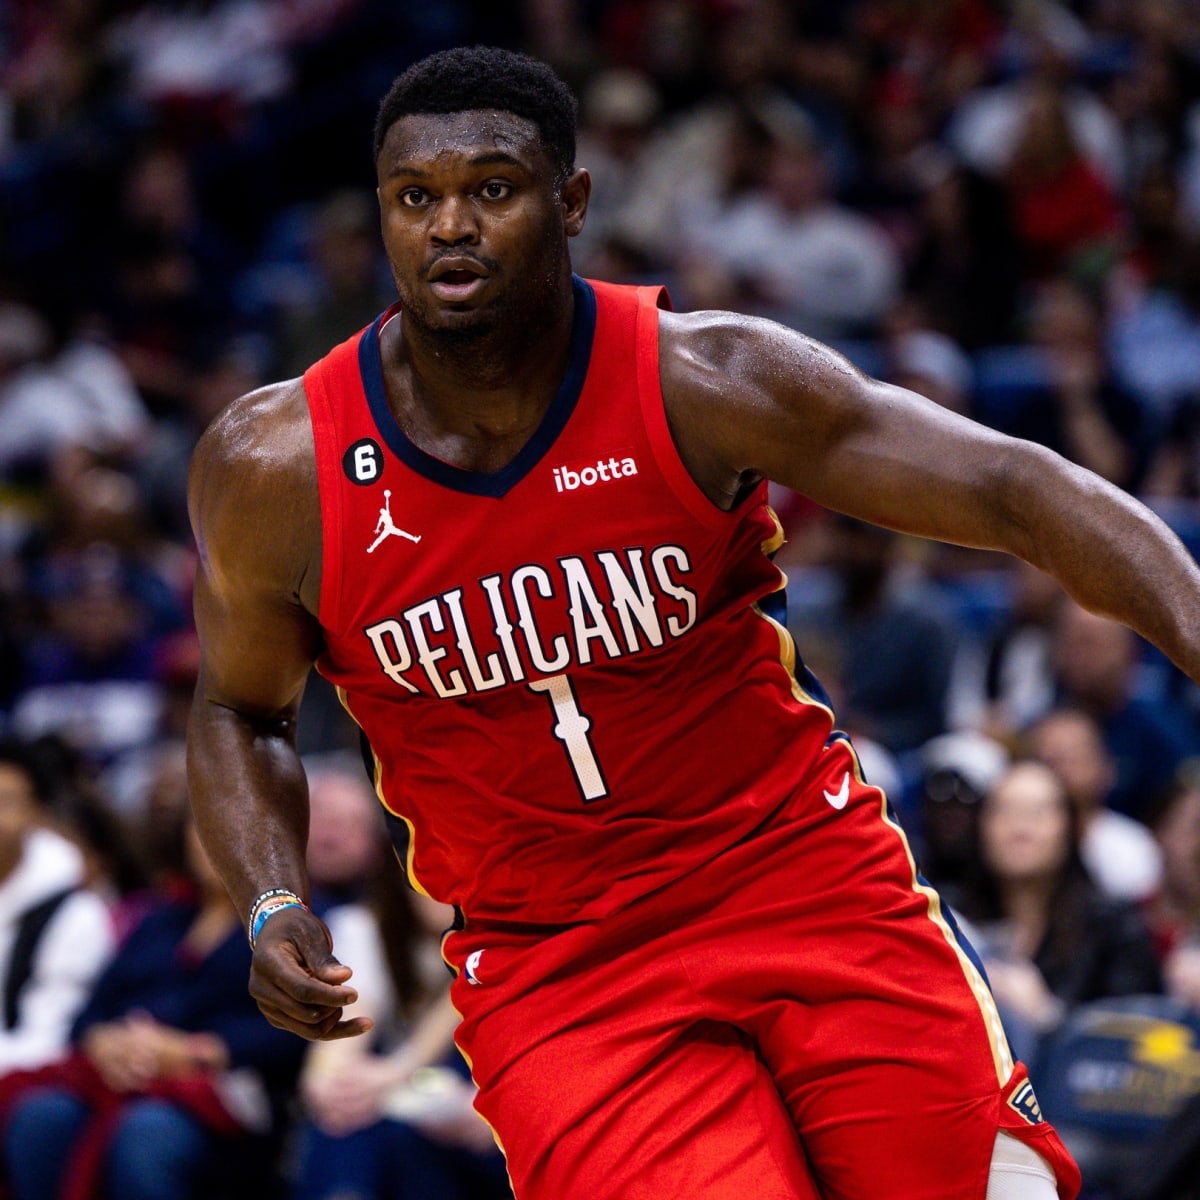 Pelicans' Zion Williamson to Wear 'Peace' on Jersey at NBA Restart